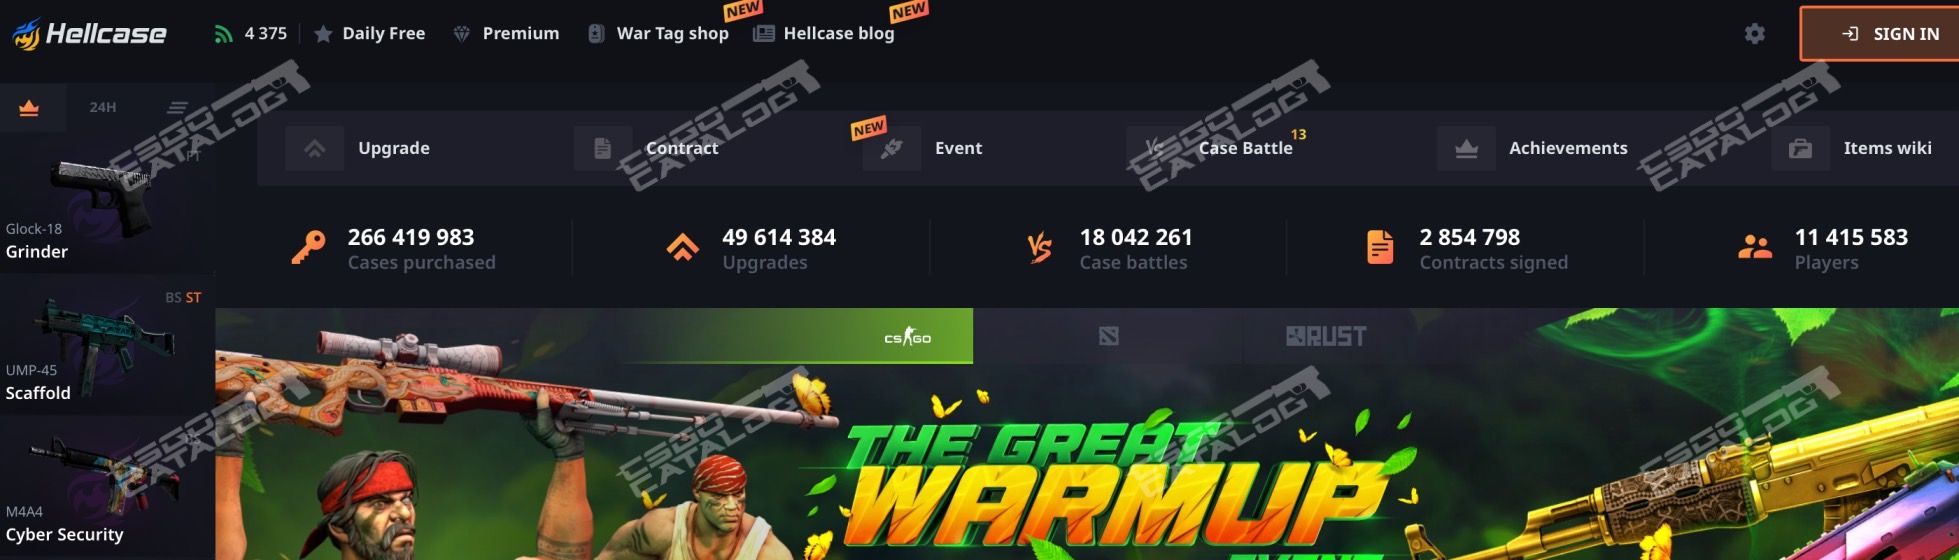 hellcase revisione